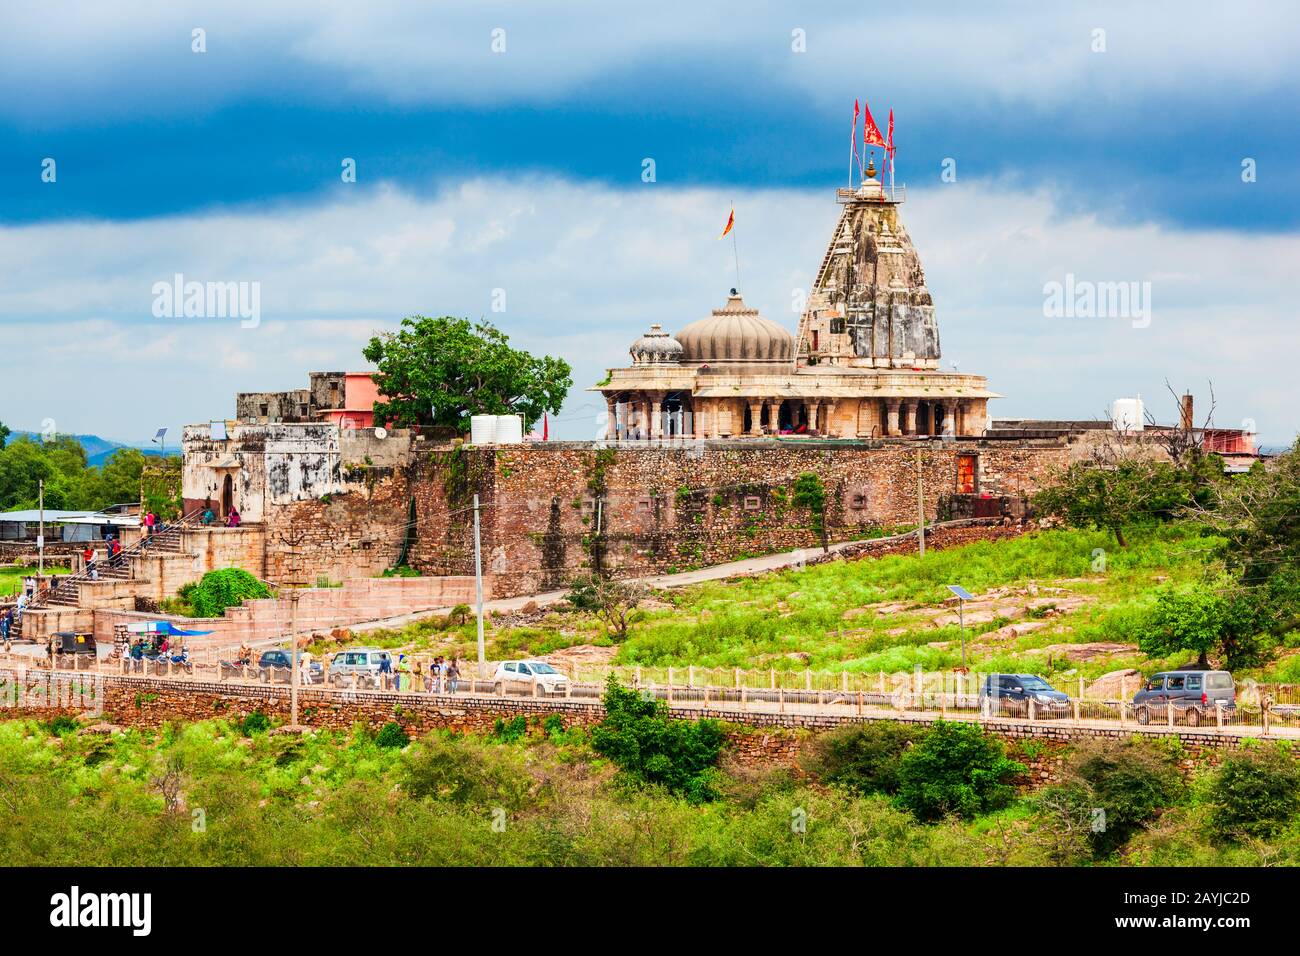 Kalika Mata Temple in Chittor Fort in Chittorgarh city, Rajasthan state of India Stock Photo